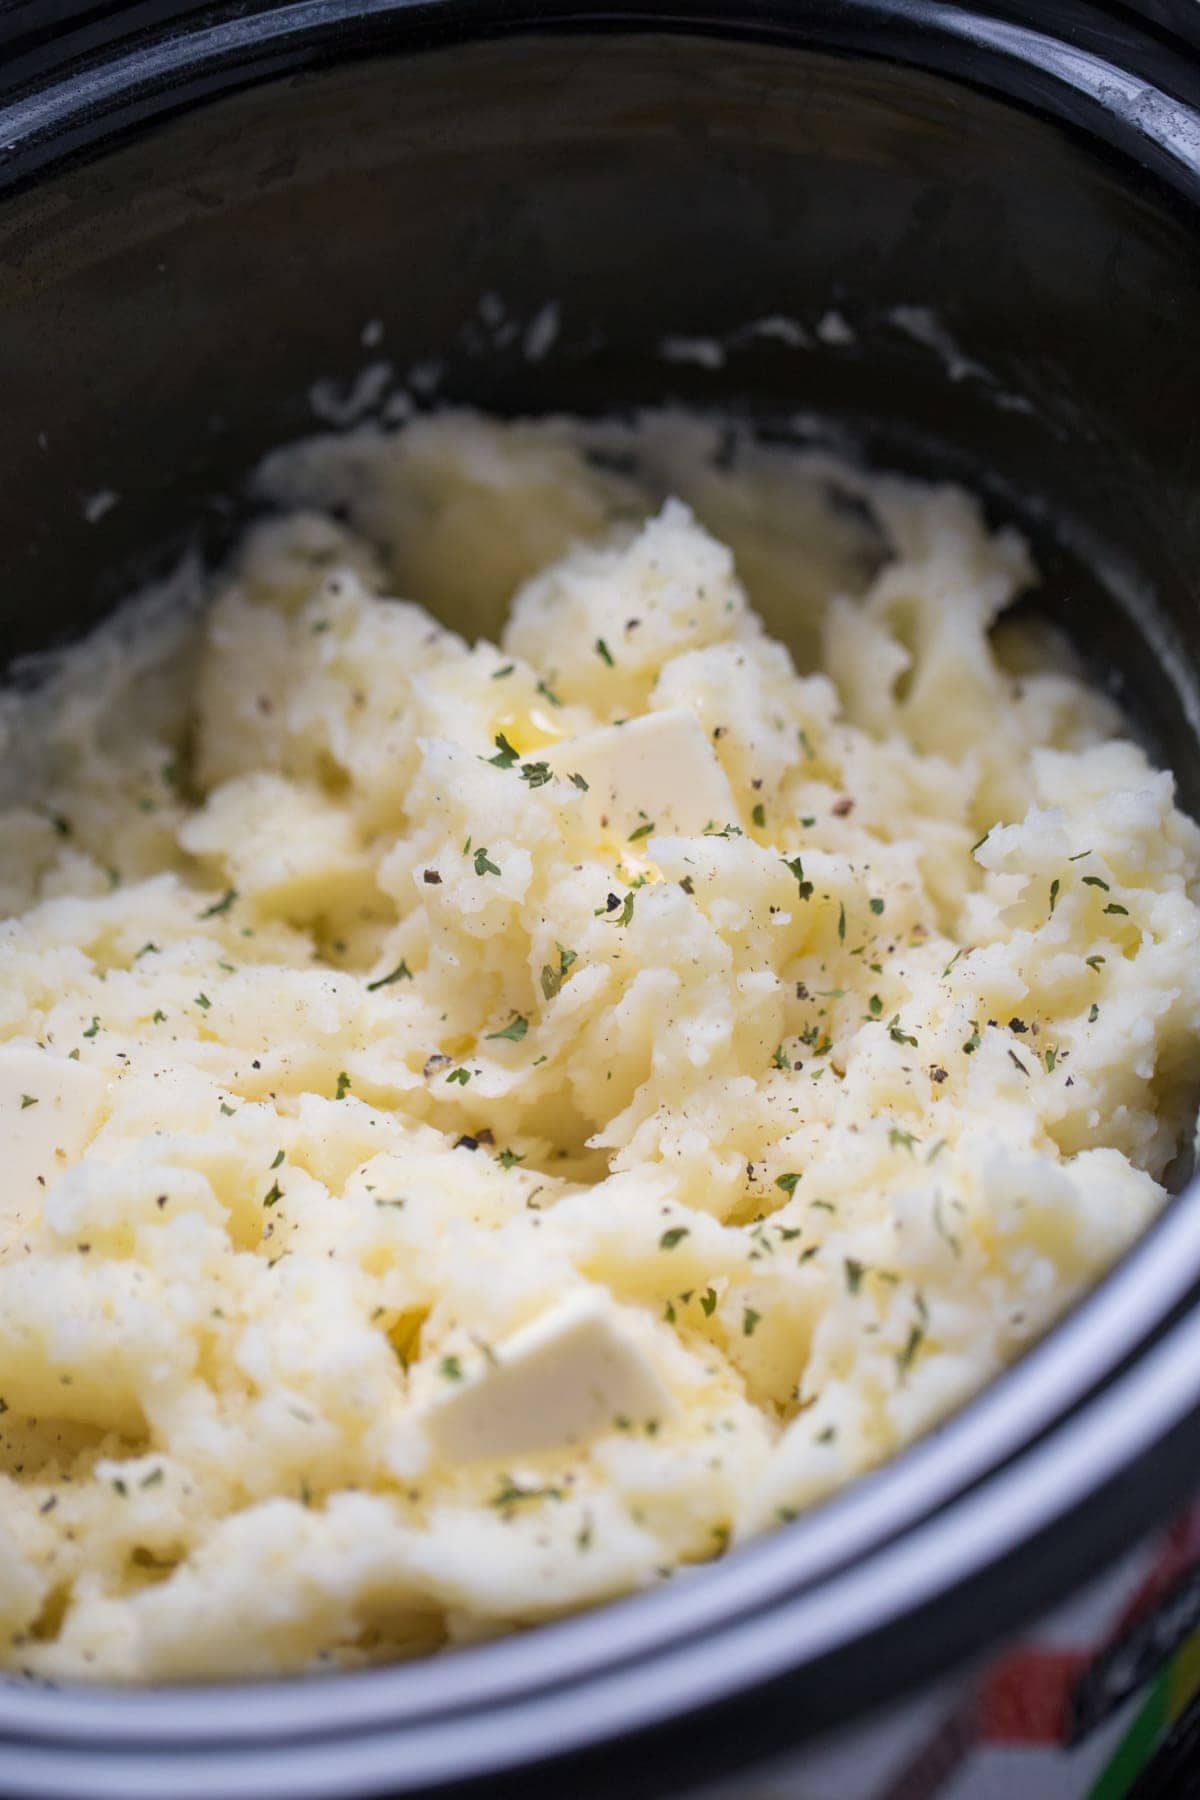 mashed potatoes in a crockpot with slices of melted butter and garnish